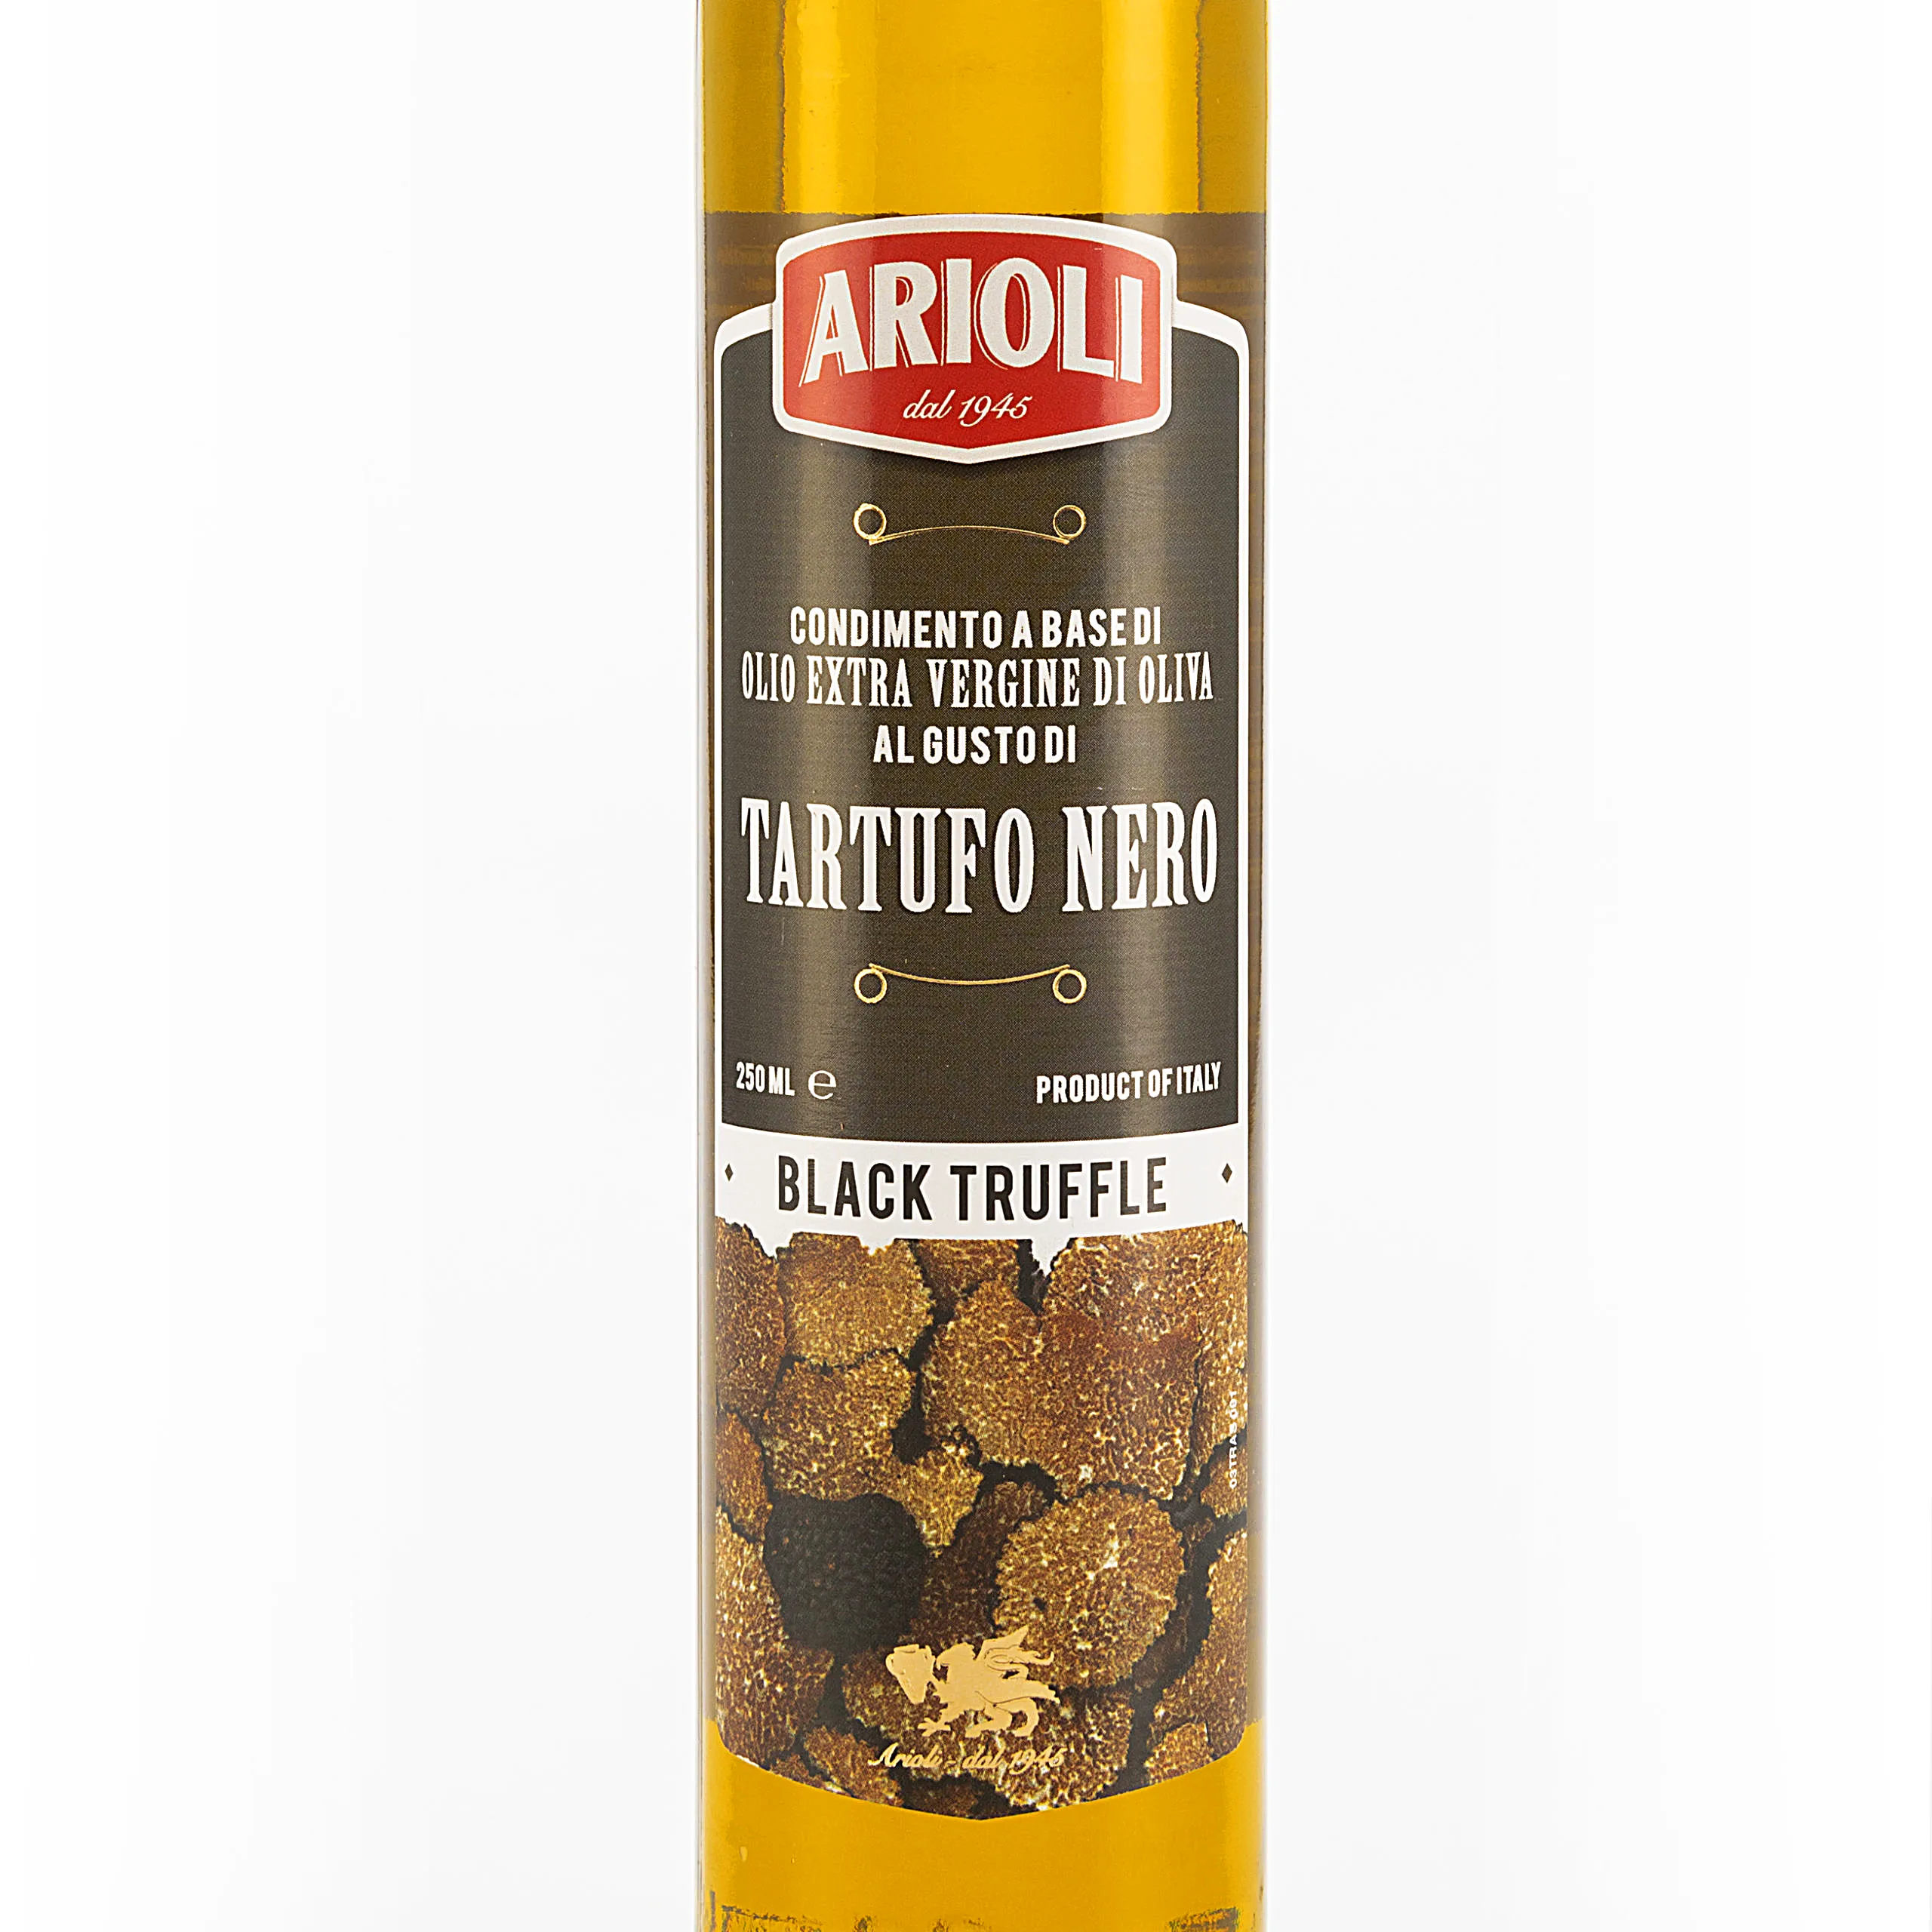 Superior Quality grade ARIOLI Extra Virgin Olive Oil with Black Truffle in 250ml. round Dorica bottle for Gourmet Shops